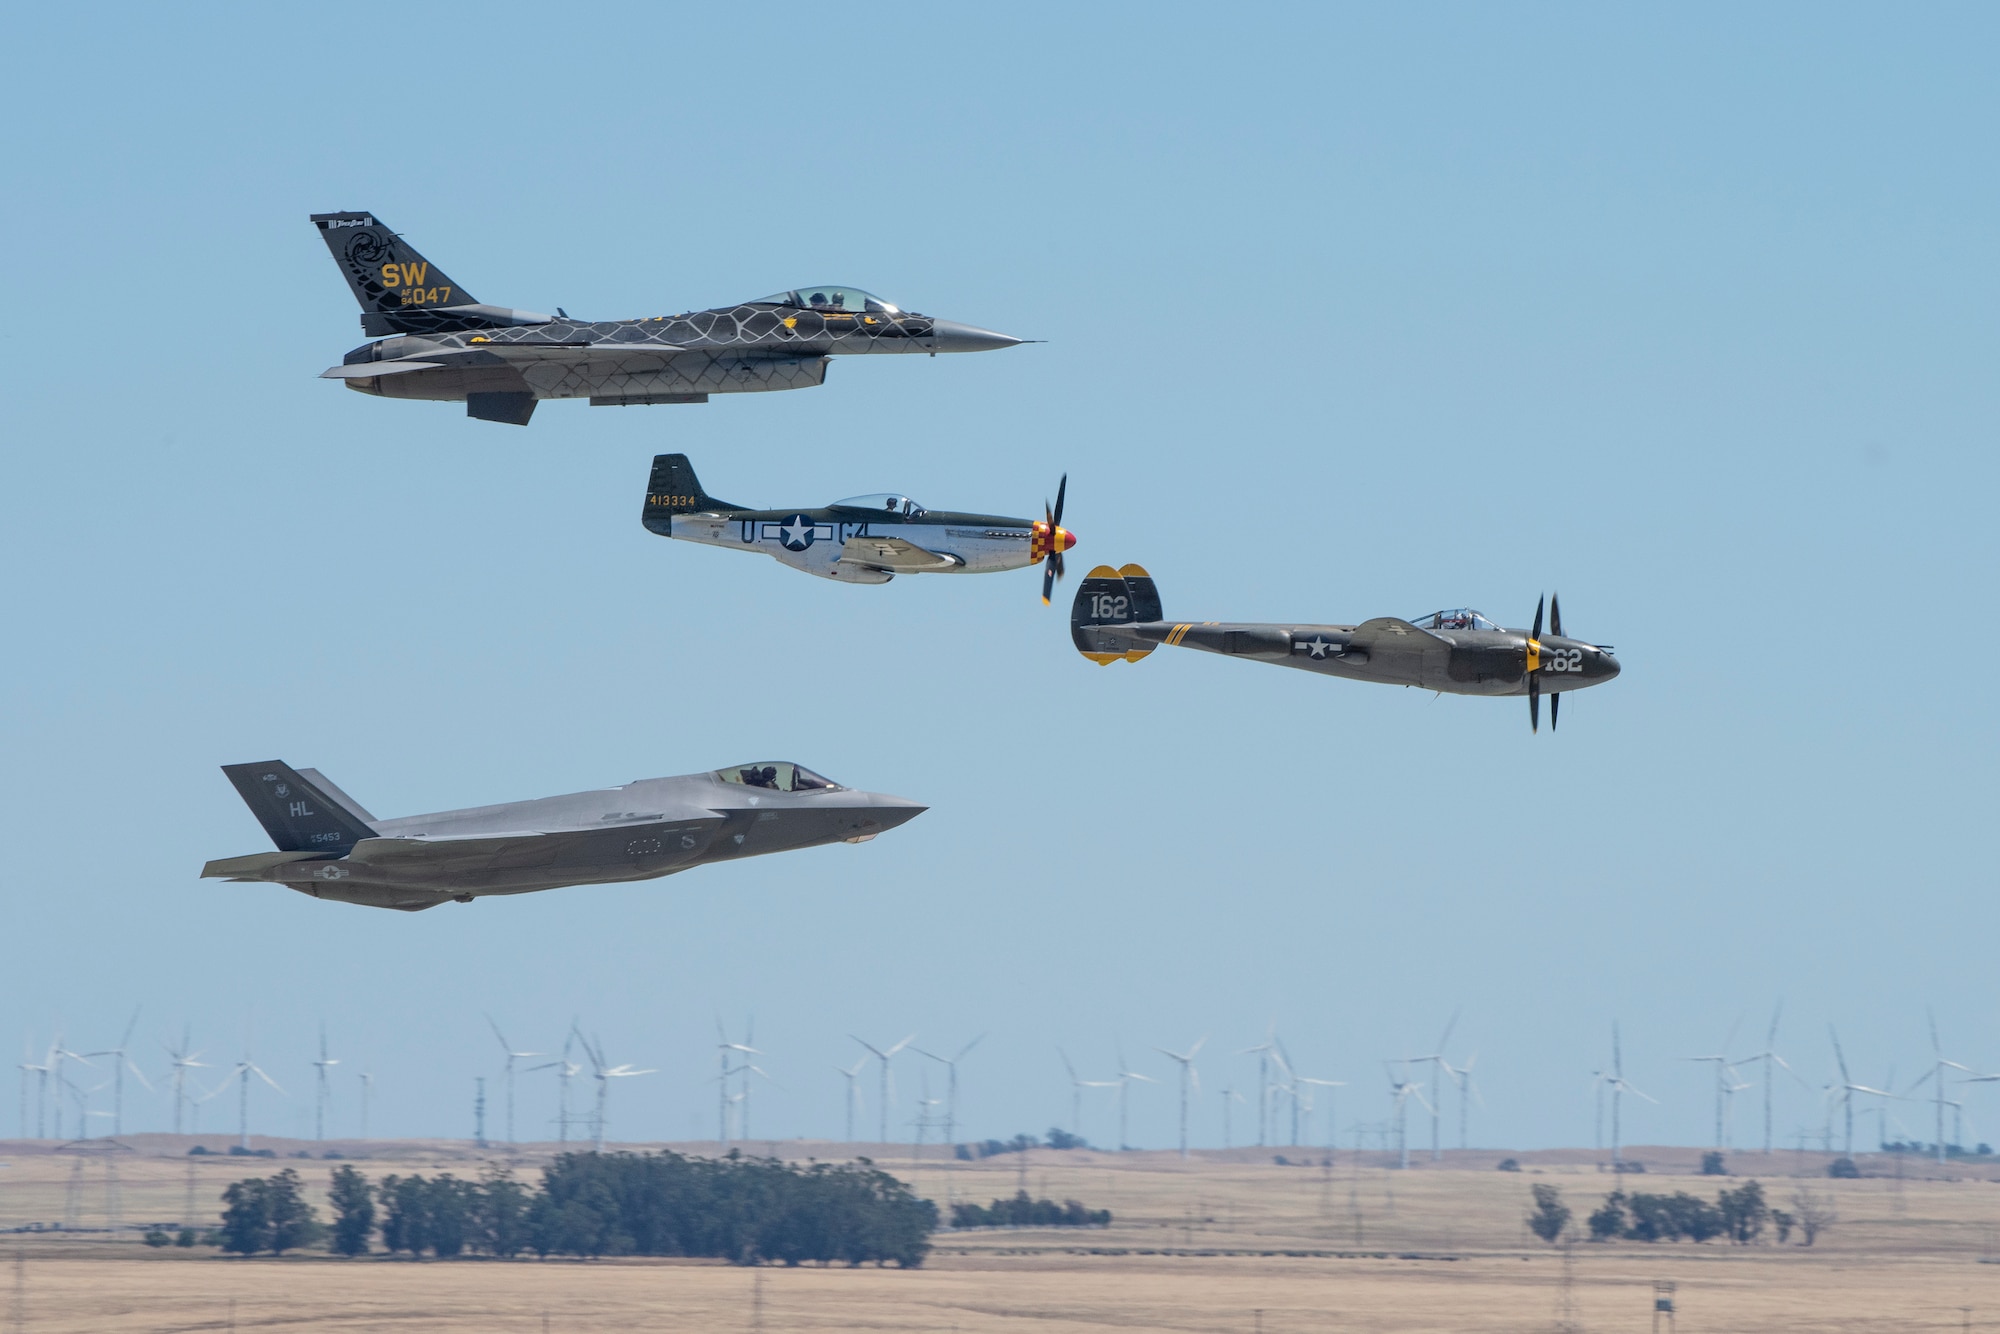 Four jets fly across the sky in part of a heritage flight